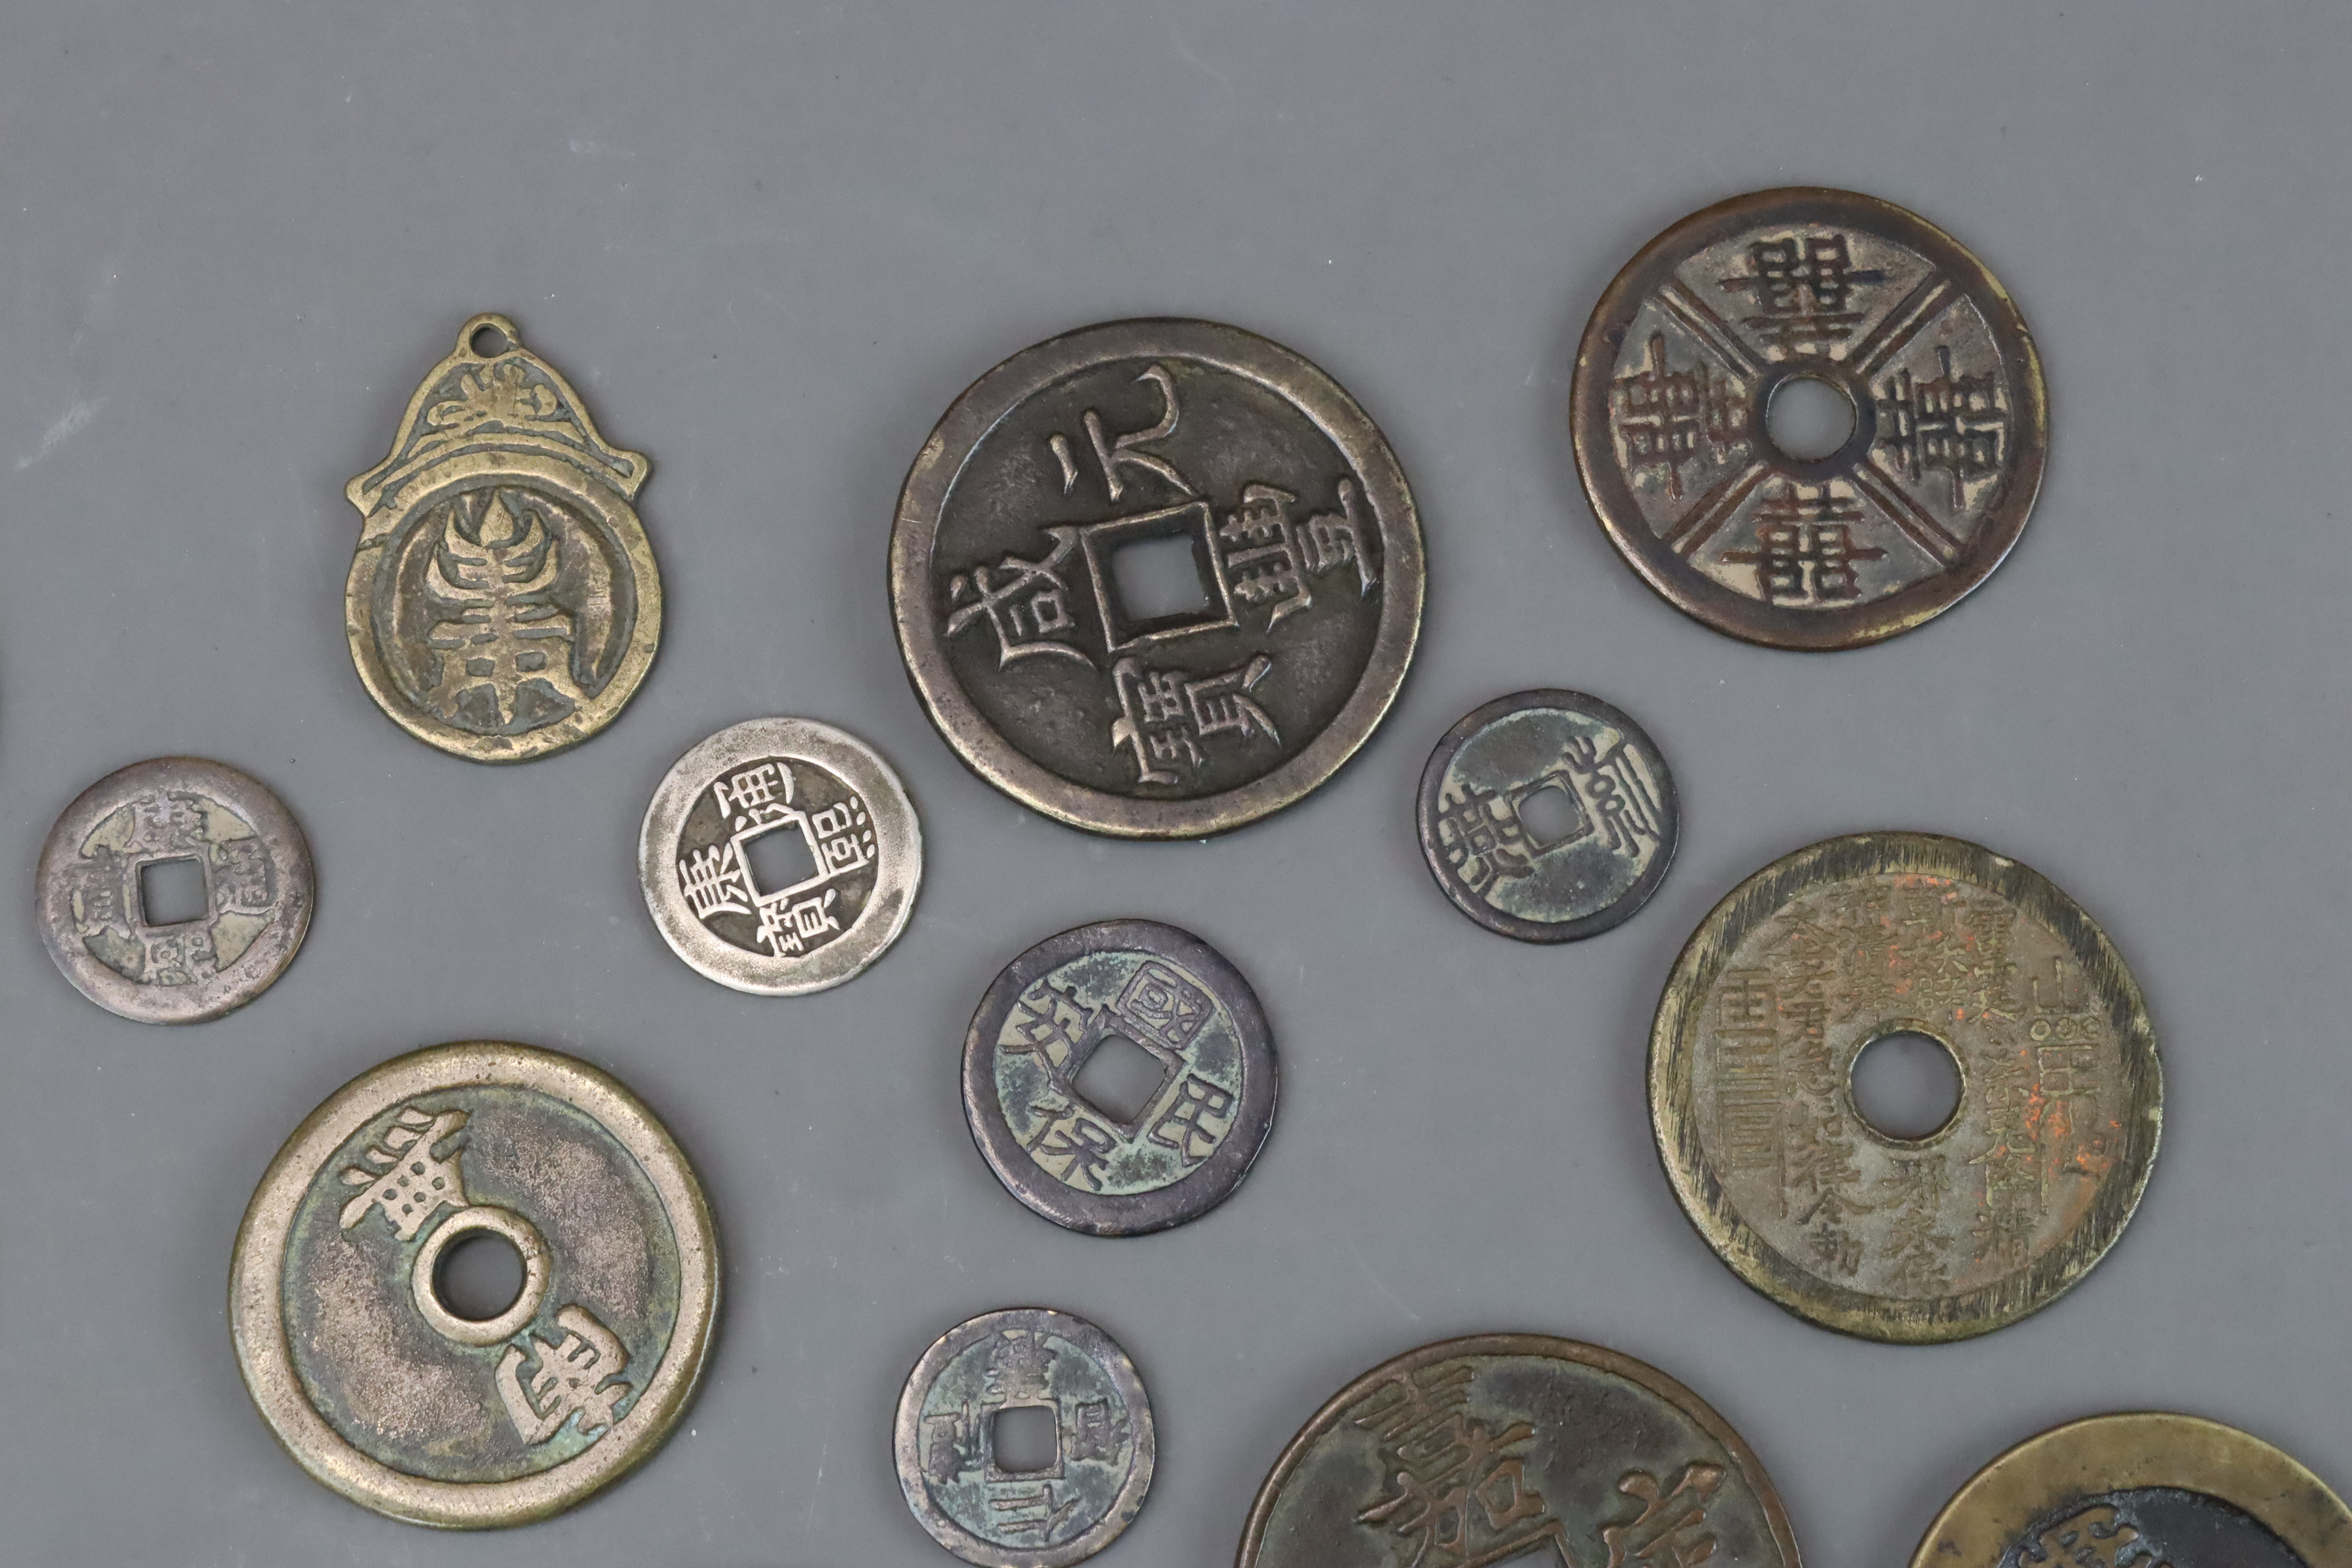 A Set of 22 Chinese Coins, Qing dynasty - Image 10 of 10